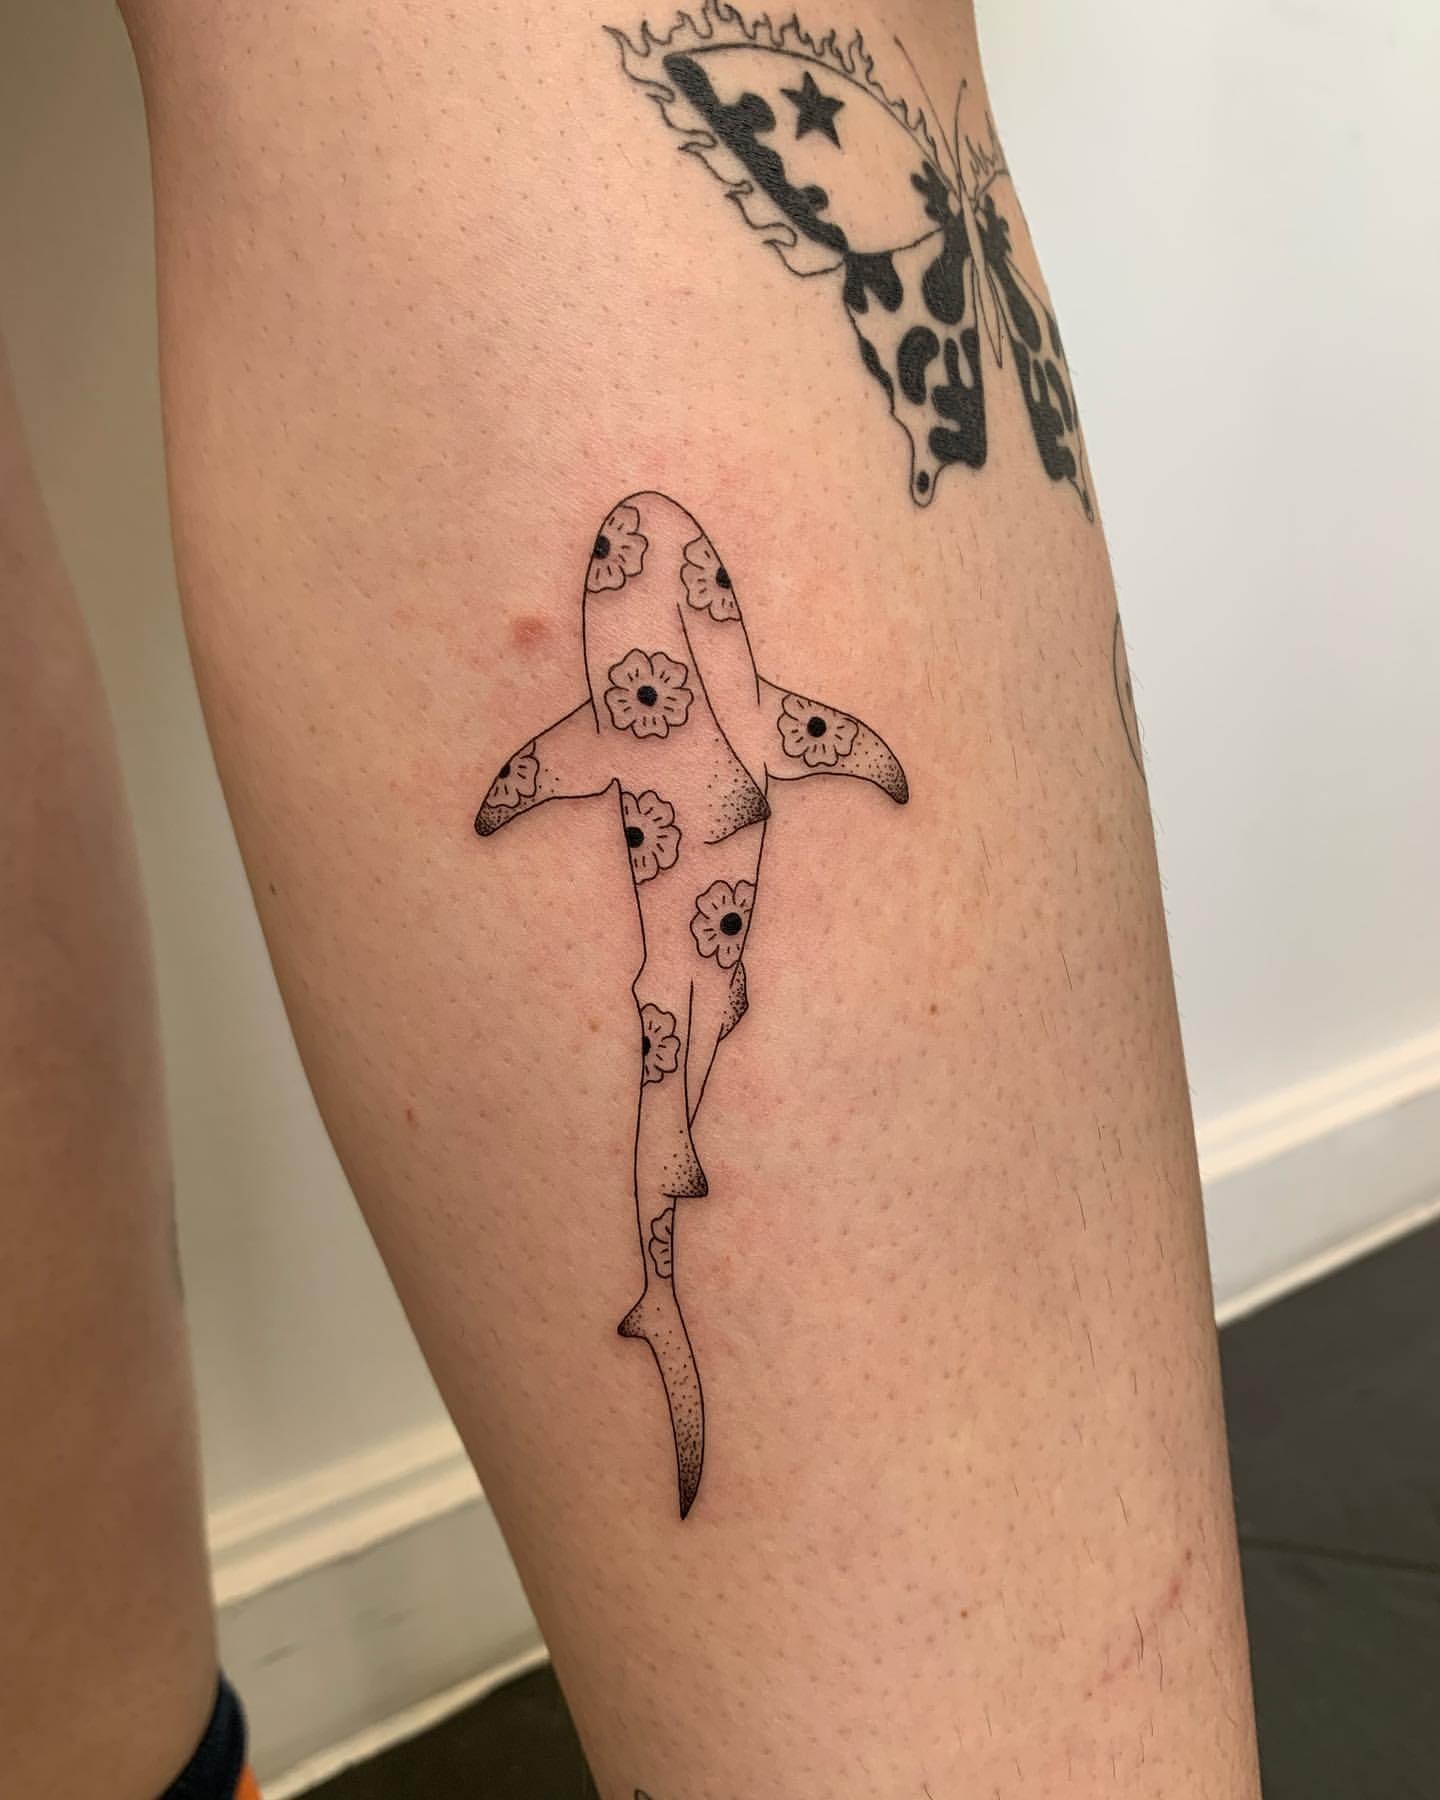 29 Incredibly Badass Shark Tattoos Every Girl Would Want